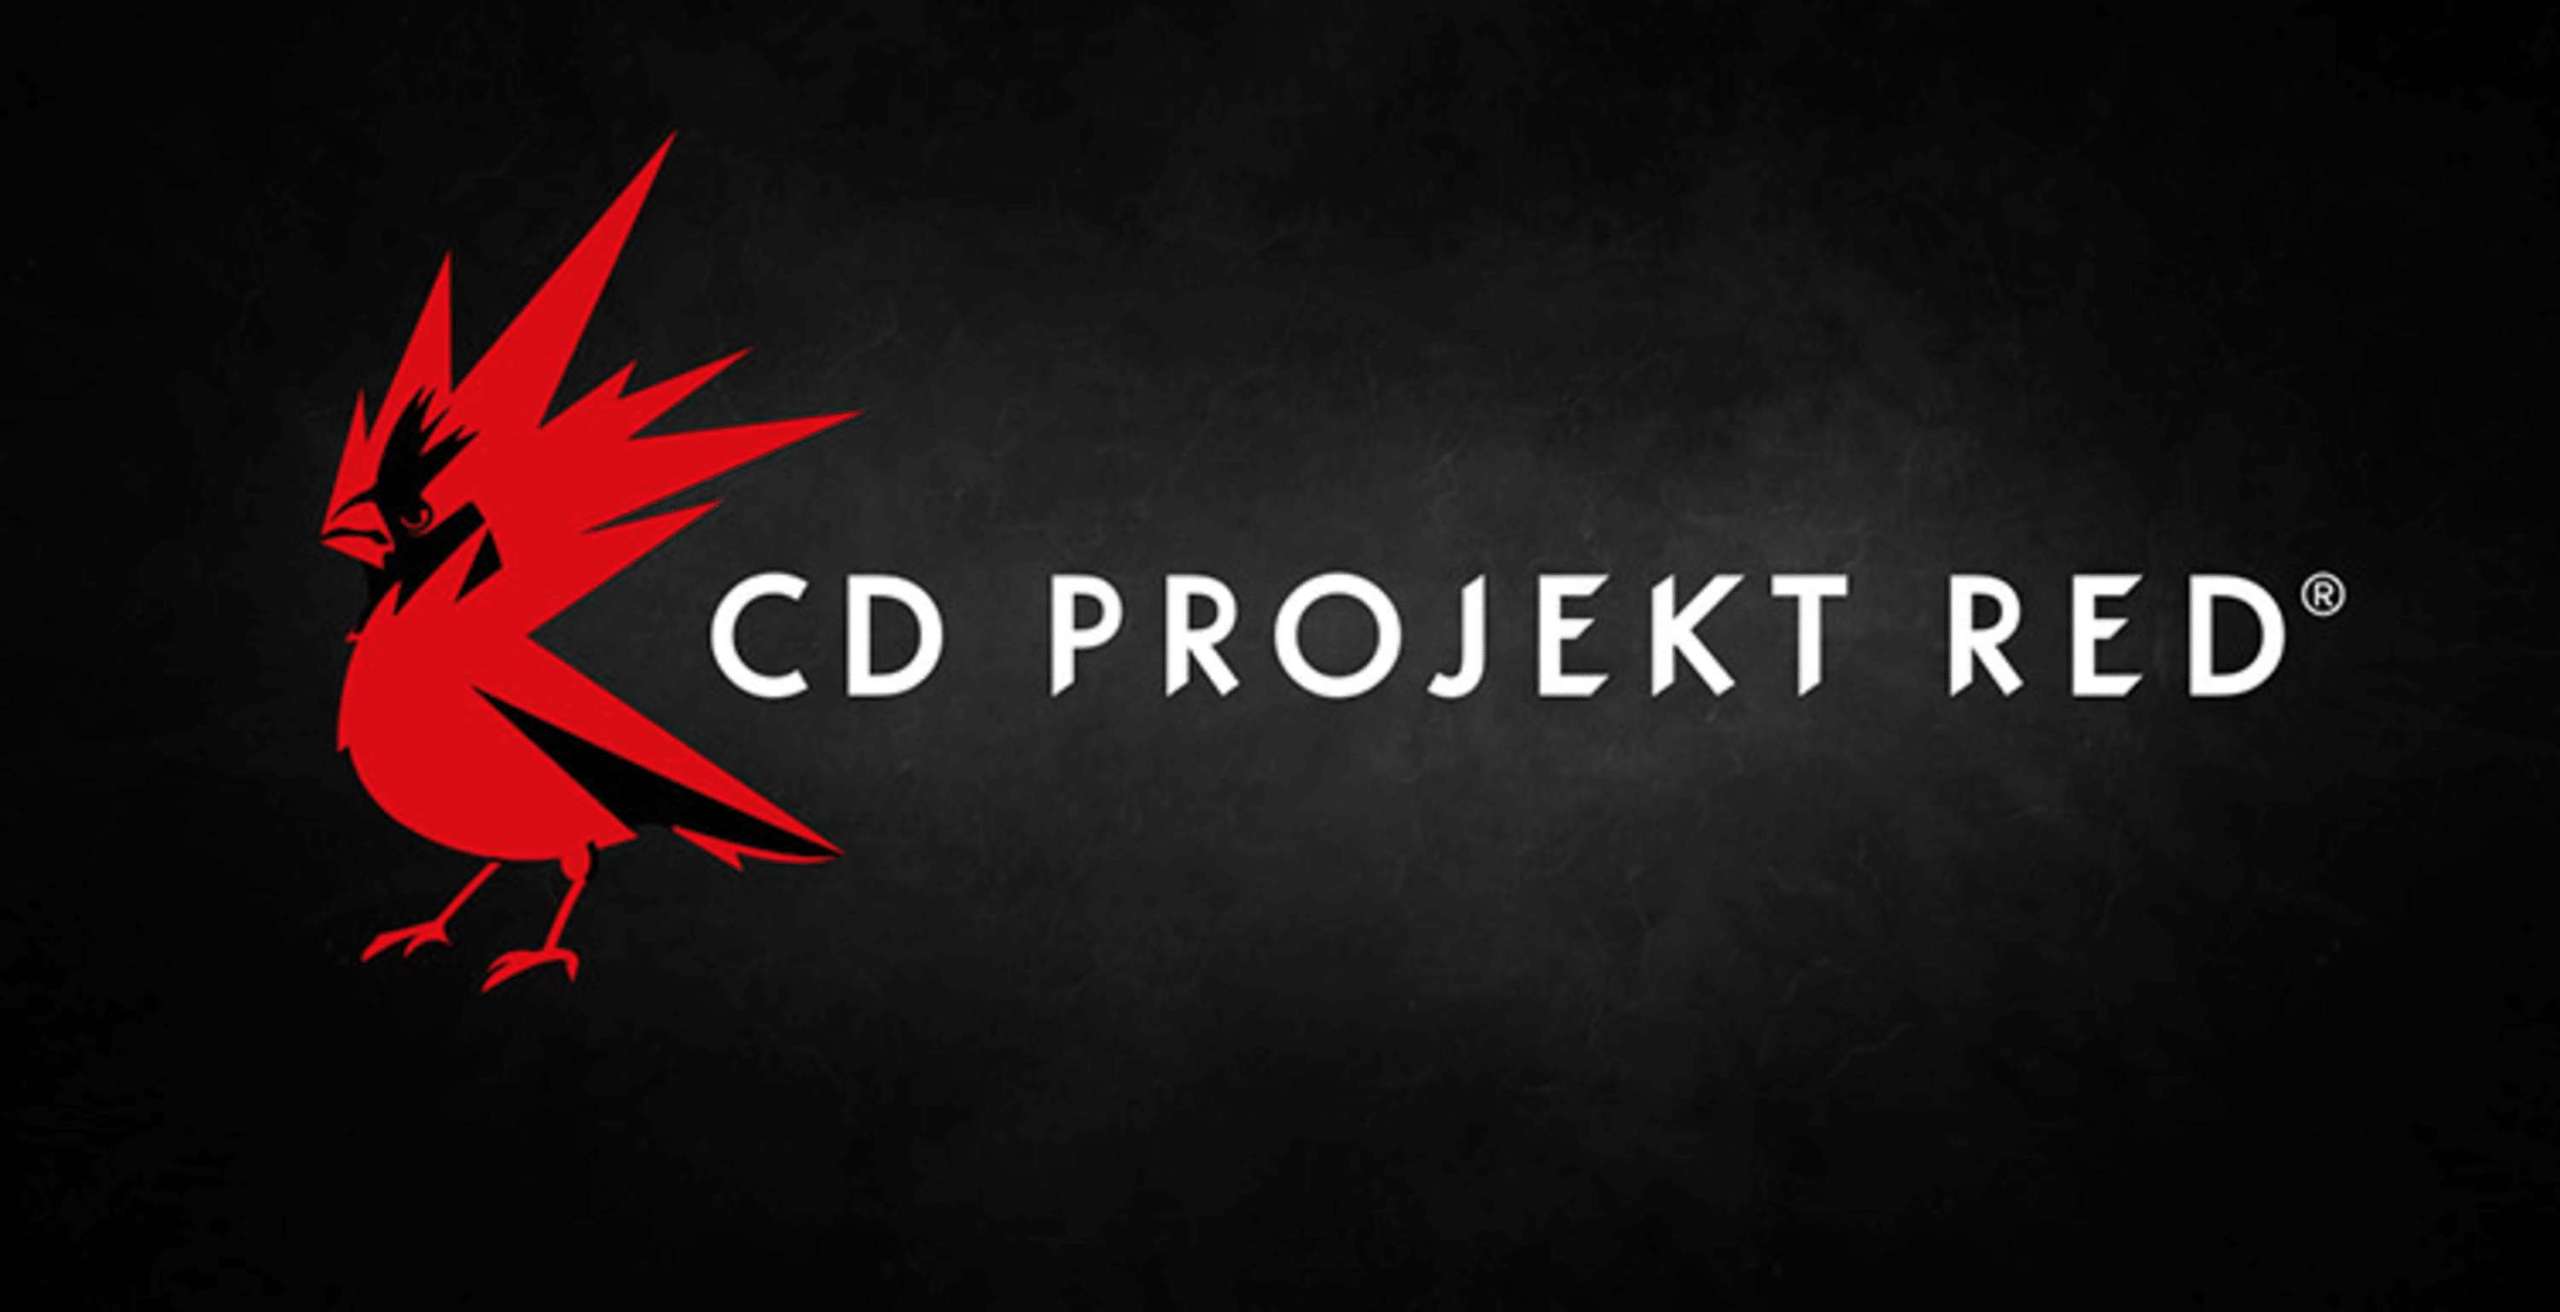 CD Projekt Red Announces That Cyberpunk 2077 Is Ending Production On The PlayStation 4 And Xbox One